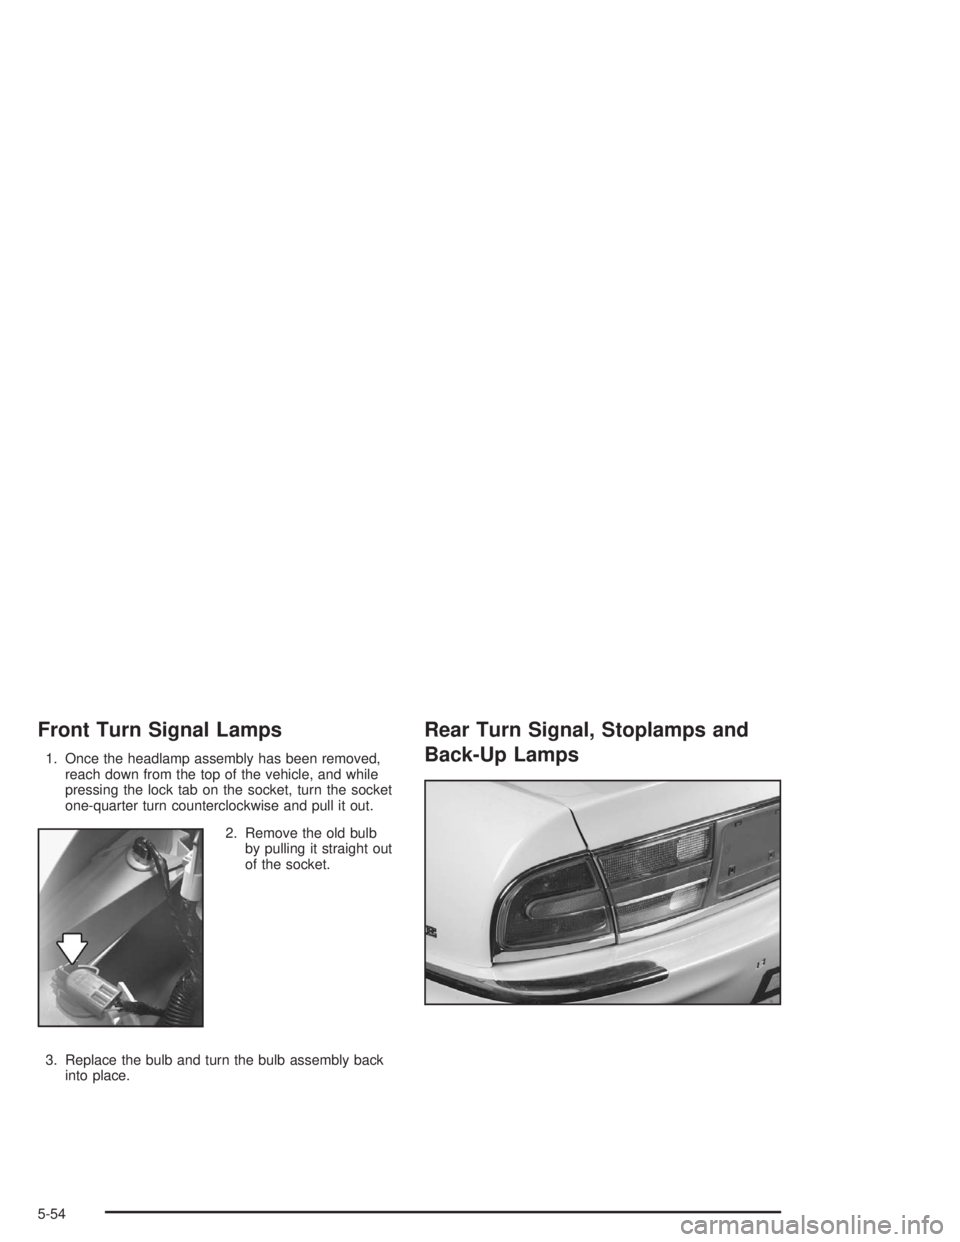 BUICK PARK AVENUE 2004  Owners Manual Front Turn Signal Lamps
1. Once the headlamp assembly has been removed,
reach down from the top of the vehicle, and while
pressing the lock tab on the socket, turn the socket
one-quarter turn counterc